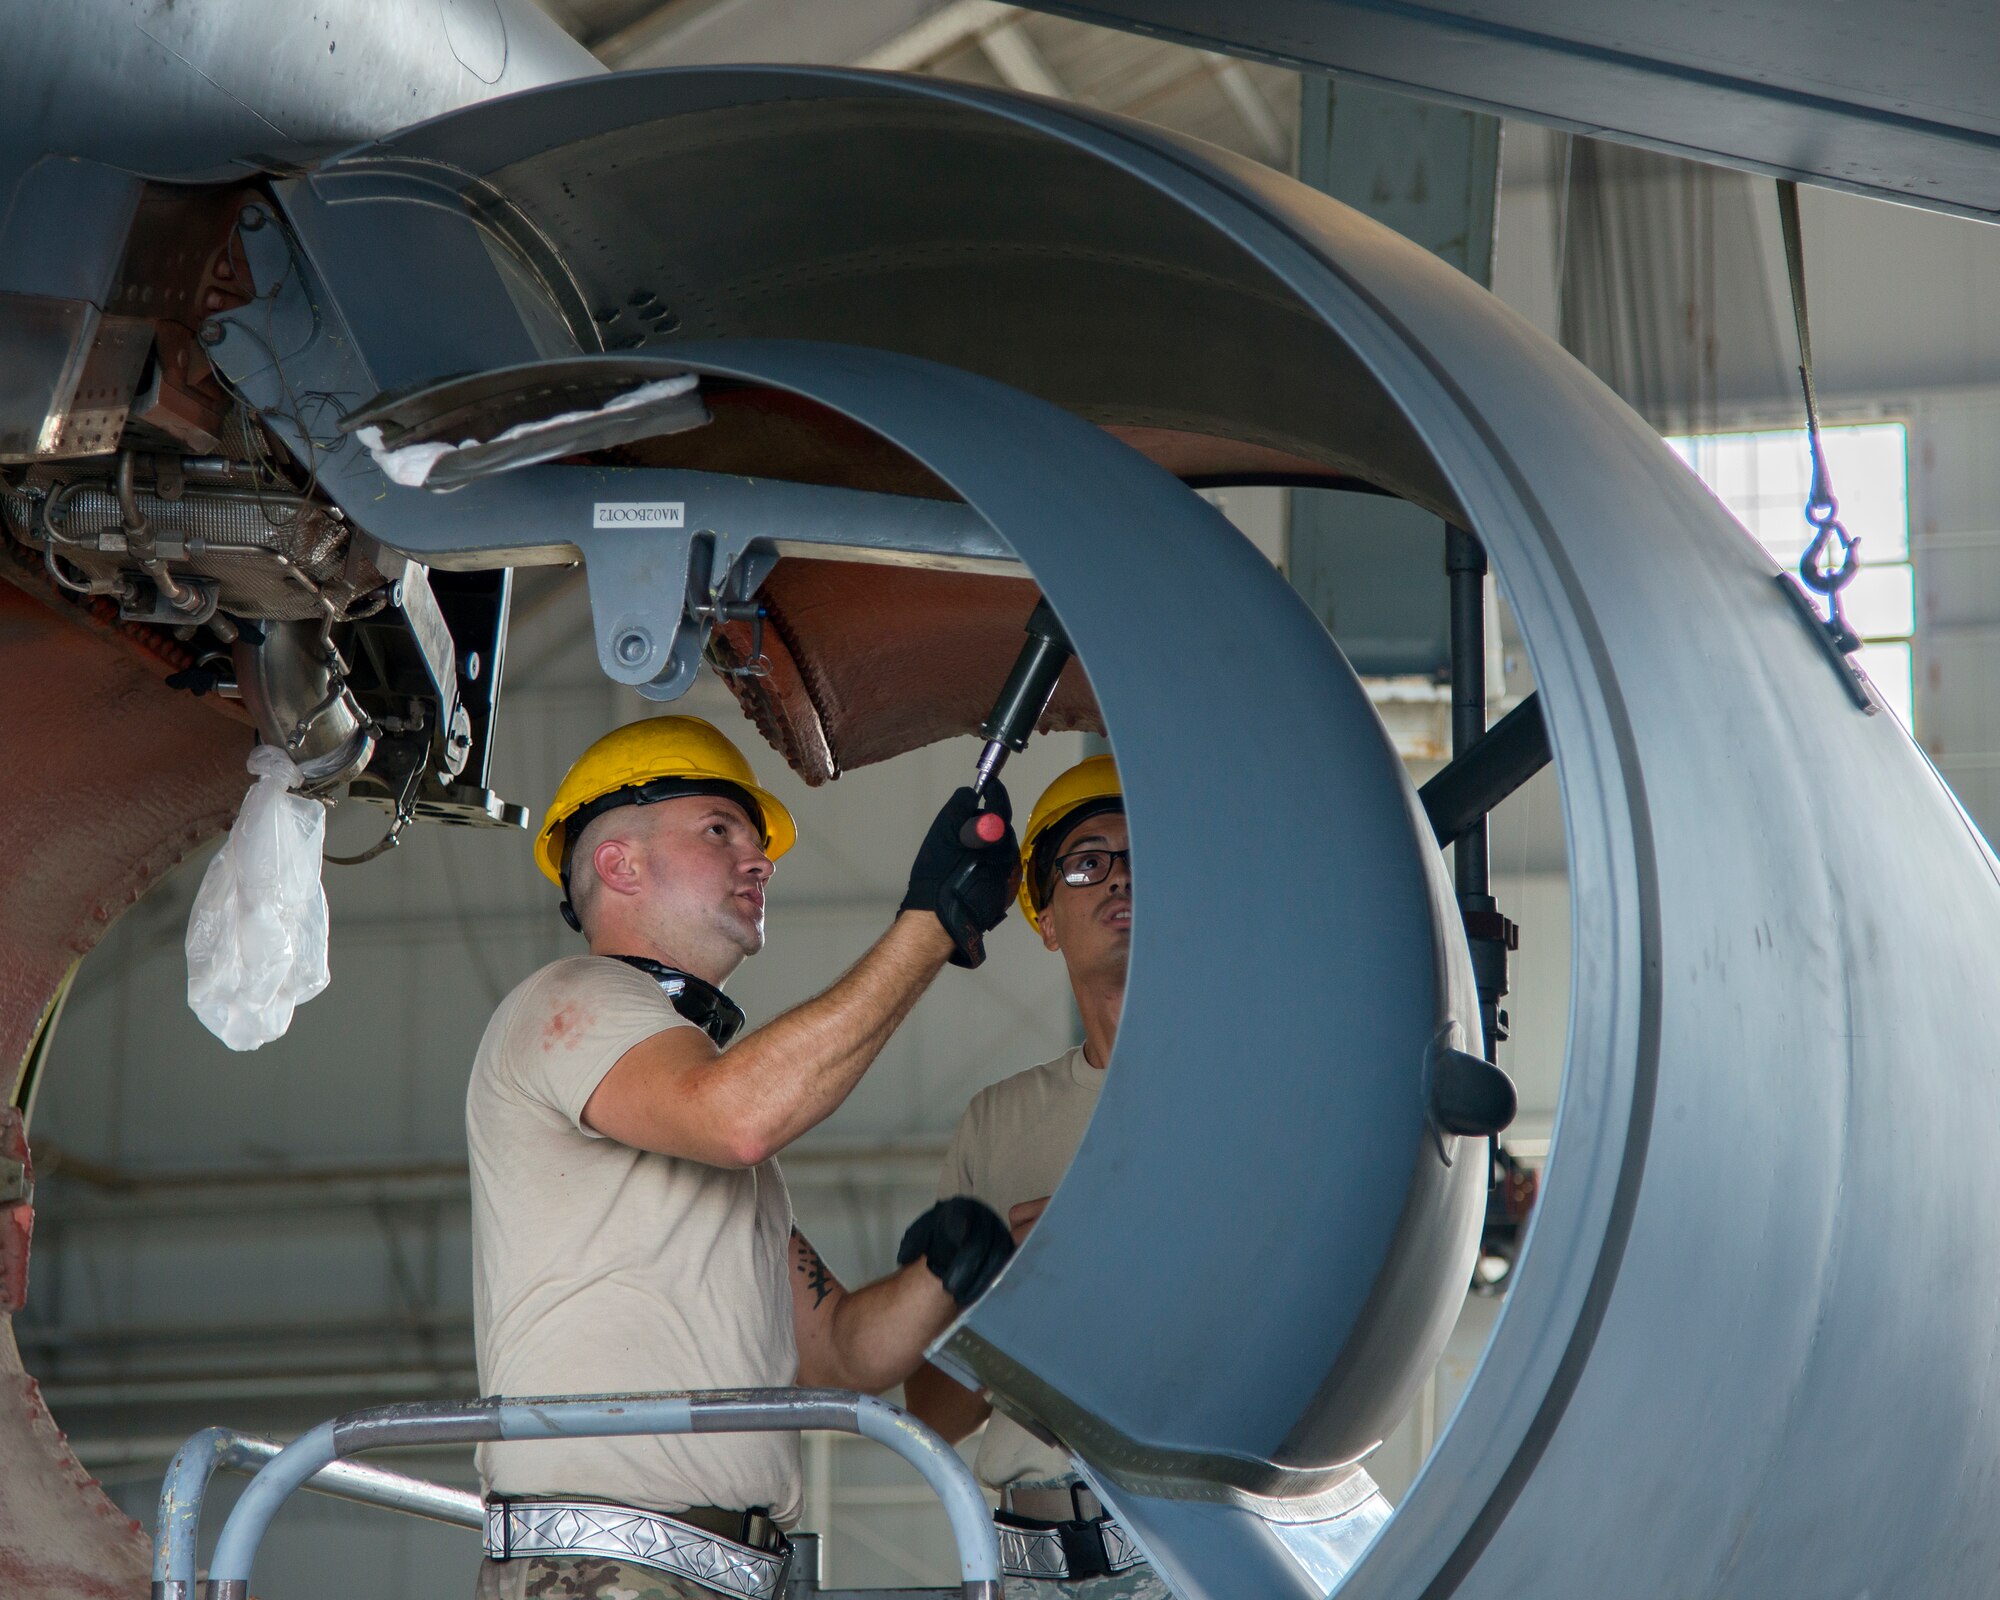 U.S. Air Force Tech Sgt. Eric Holton, a 6th Maintenance Squadron (MXS) aerospace propulsion NCO in charge, and Staff Sgt. Neftali Torres Cruz, a 6th MXS crew chief, inspect the cowling of a KC-135 Stratotanker, July 1, 2019, at MacDill Air Force Base, Fla.